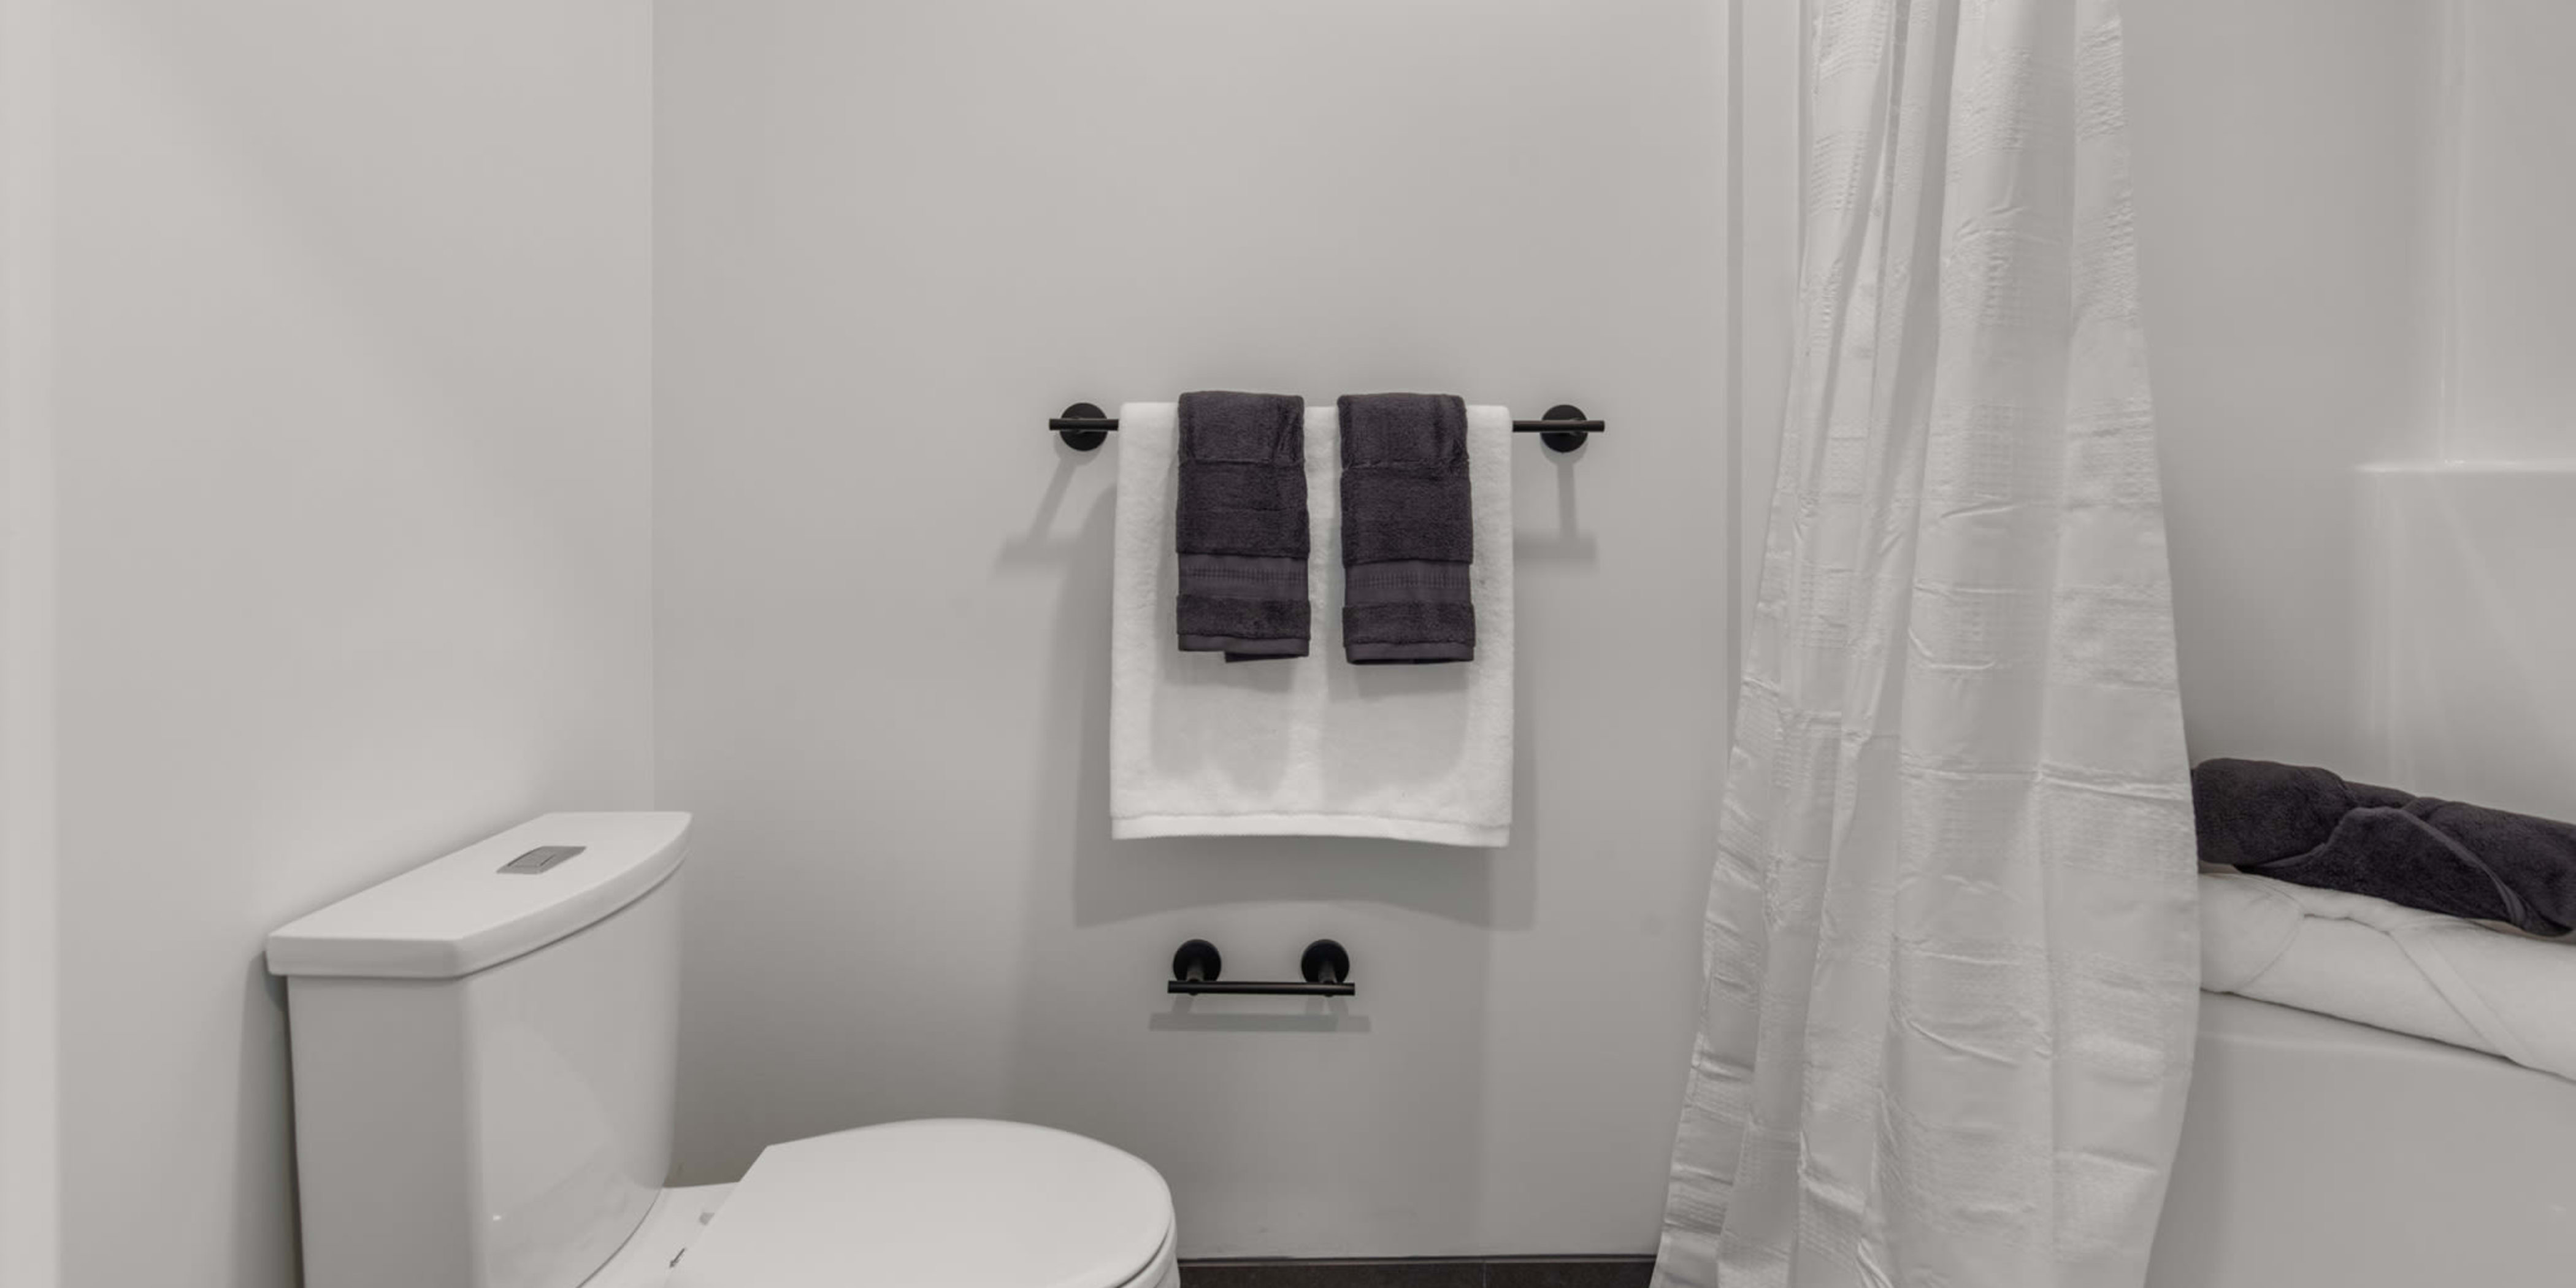 Studios in Nashville, TN - Rutledge Flats - Bathroom with a Toilet, Shower and Towels